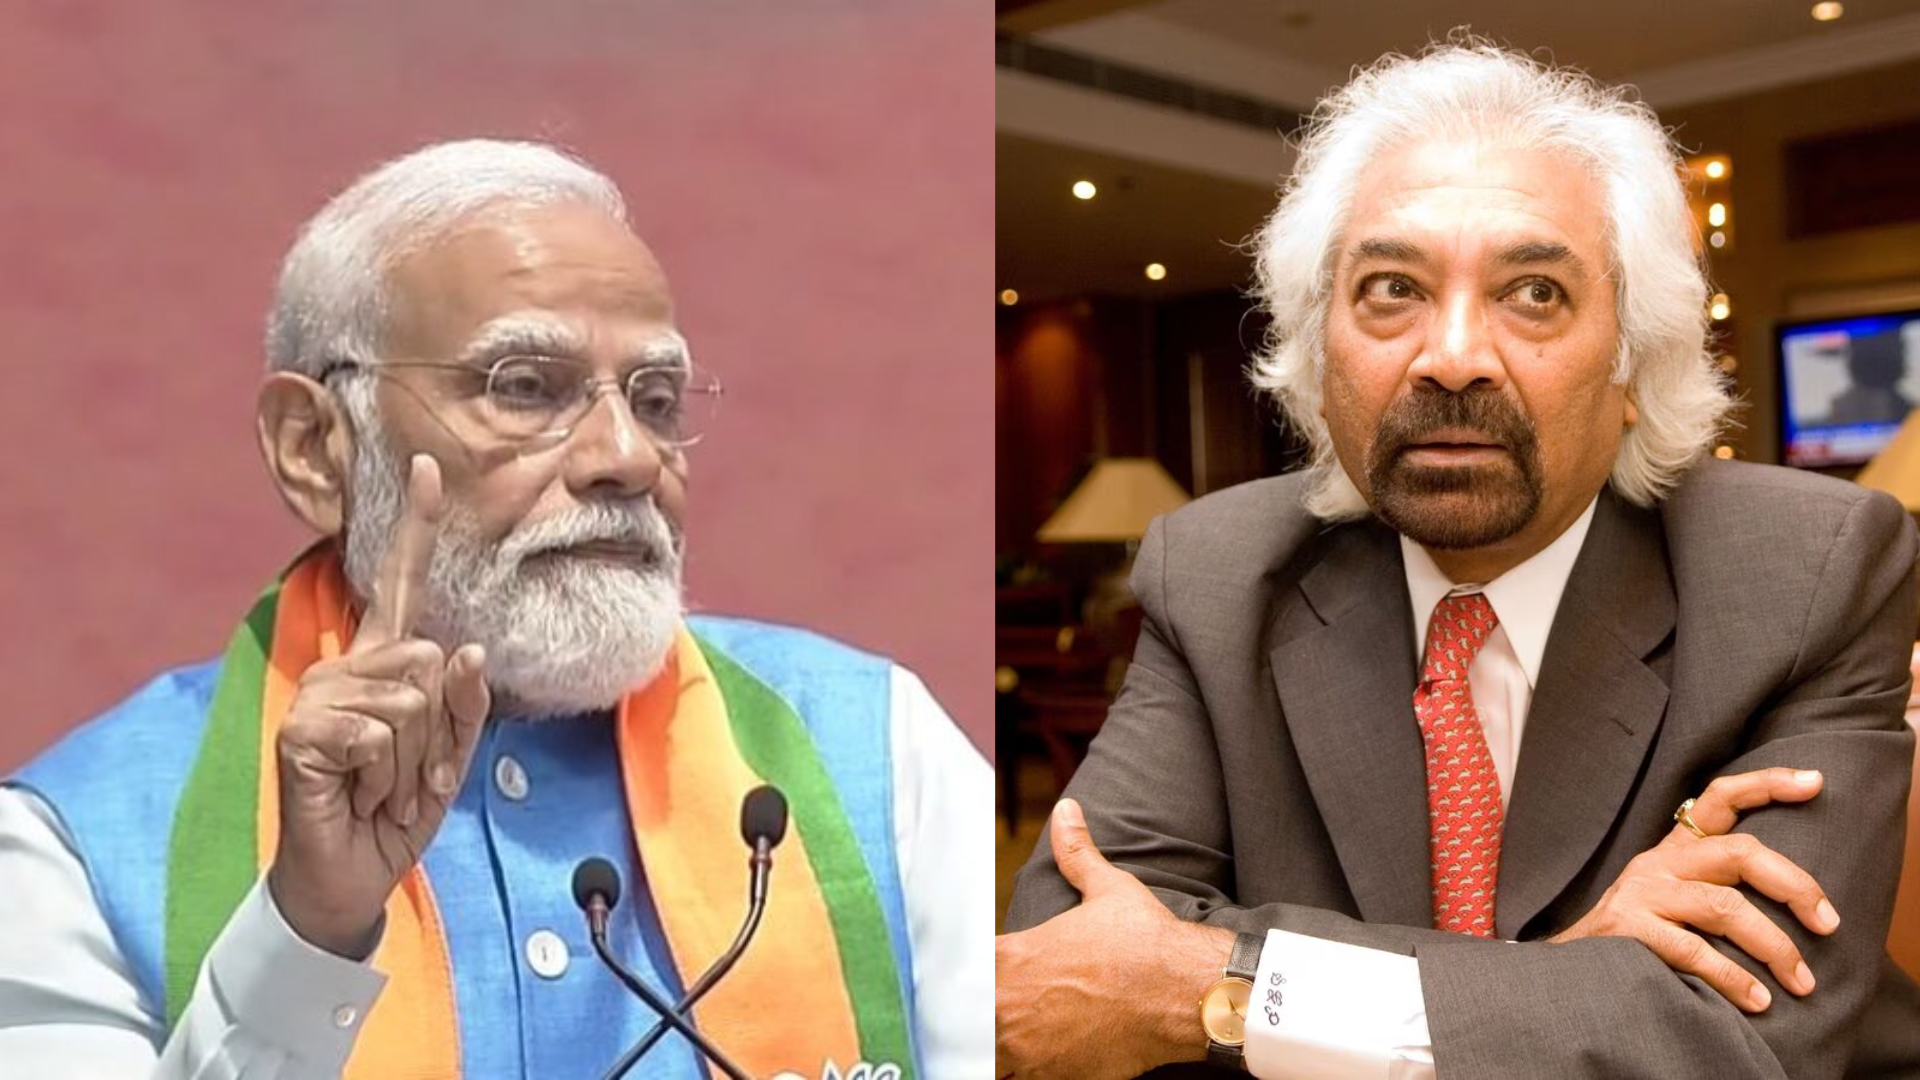 PM Modi Accuses Congress of Planning Inheritance Tax; Congress Distances Itself from Sam Pitroda’s Comments